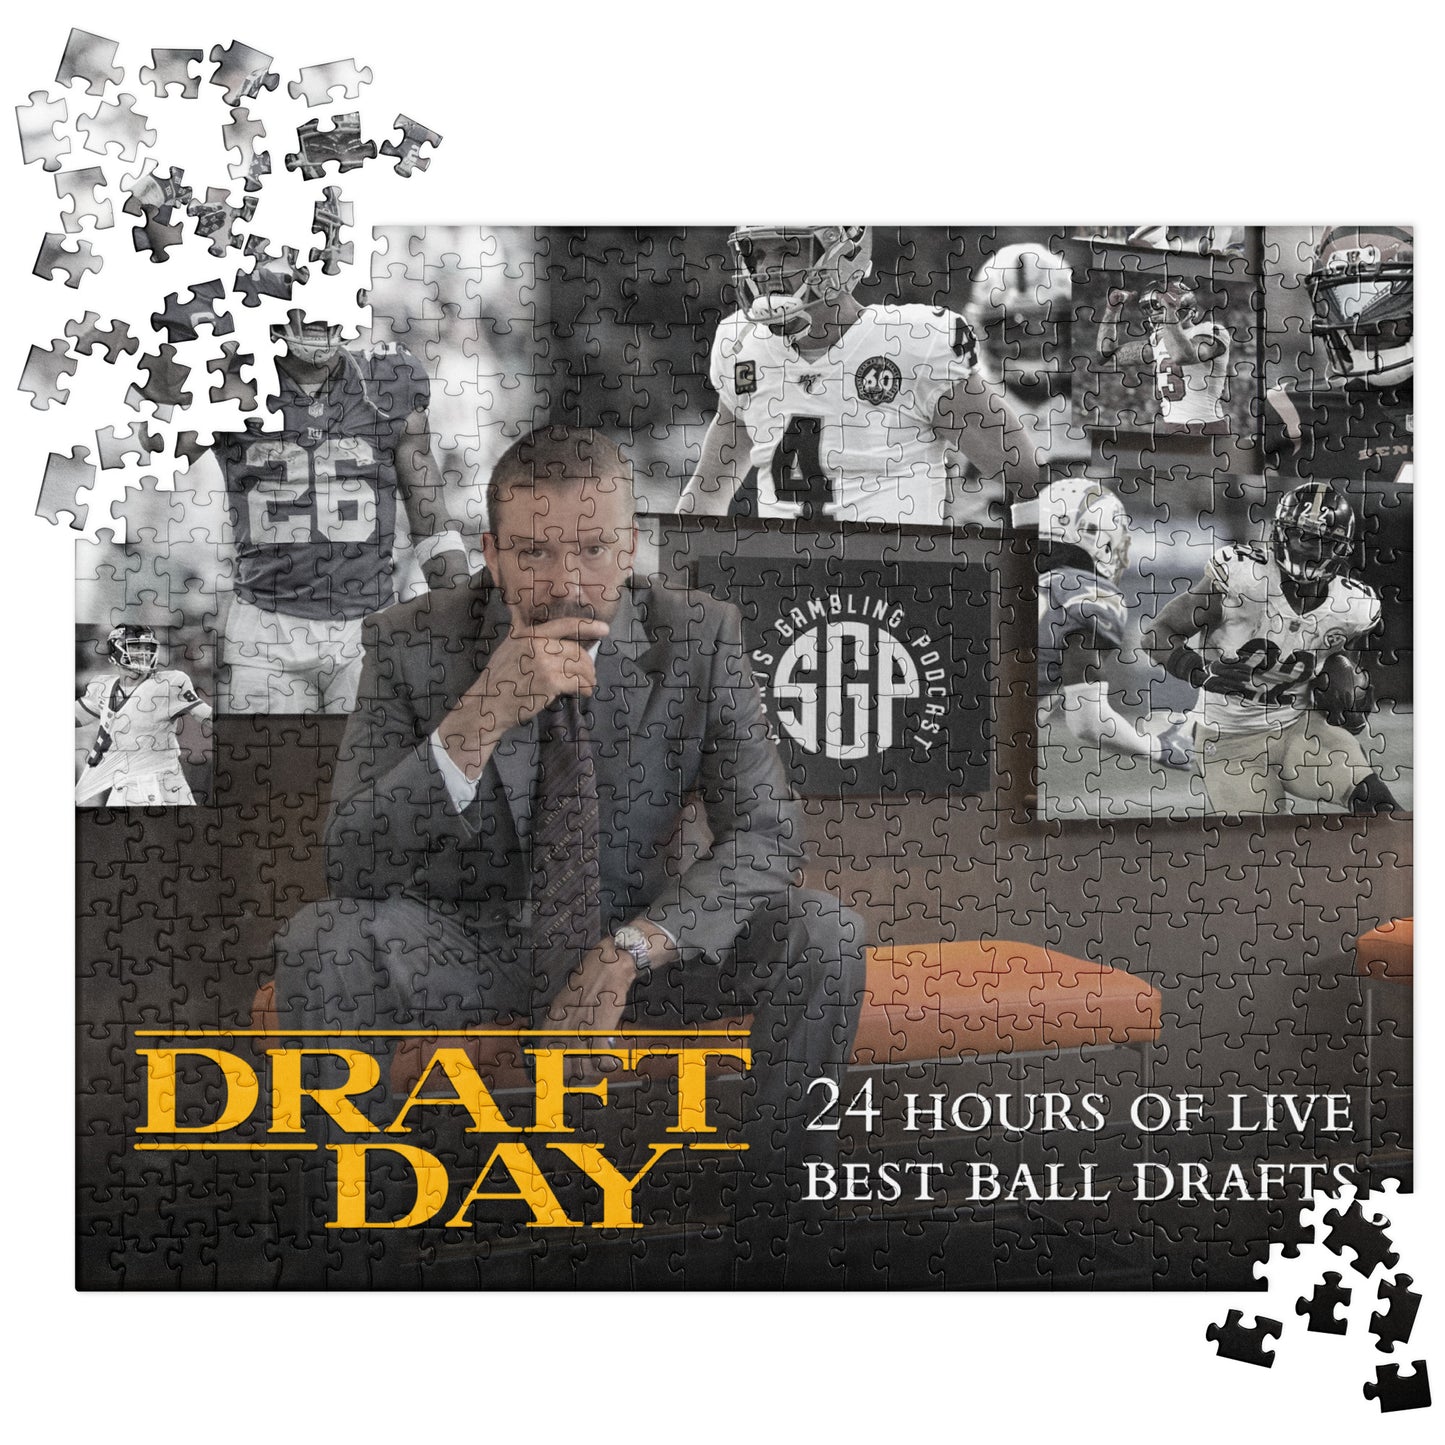 Draft Day 2: 24 Hours of Live Best Ball Drafts - Jigsaw puzzle (520 pcs)